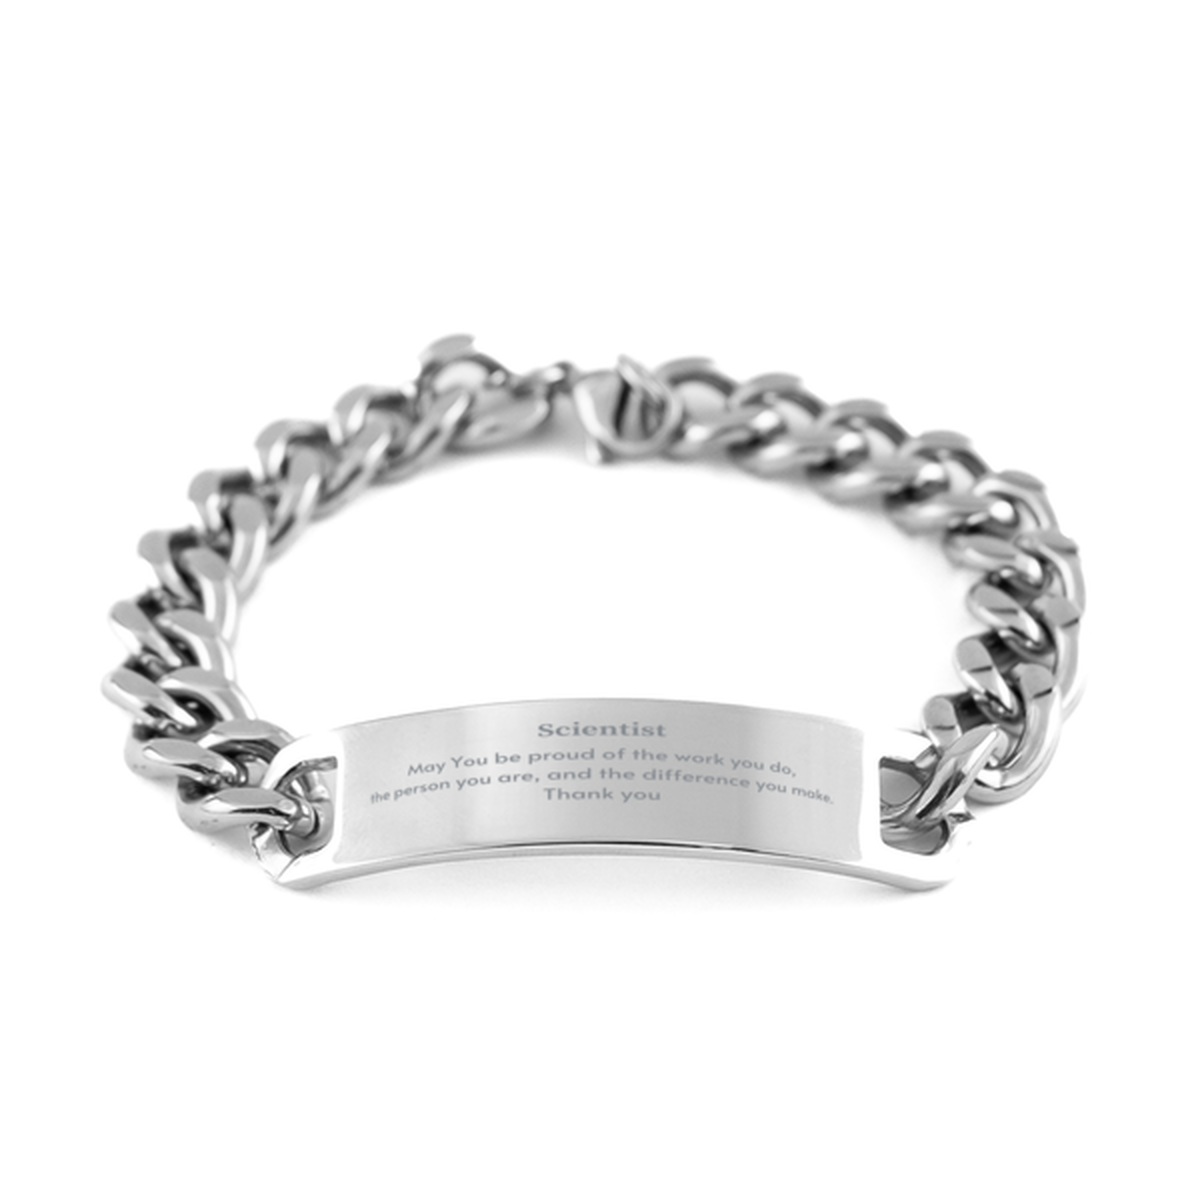 Heartwarming Cuban Chain Stainless Steel Bracelet Retirement Coworkers Gifts for Scientist, Scientist May You be proud of the work you do, the person you are Gifts for Boss Men Women Friends